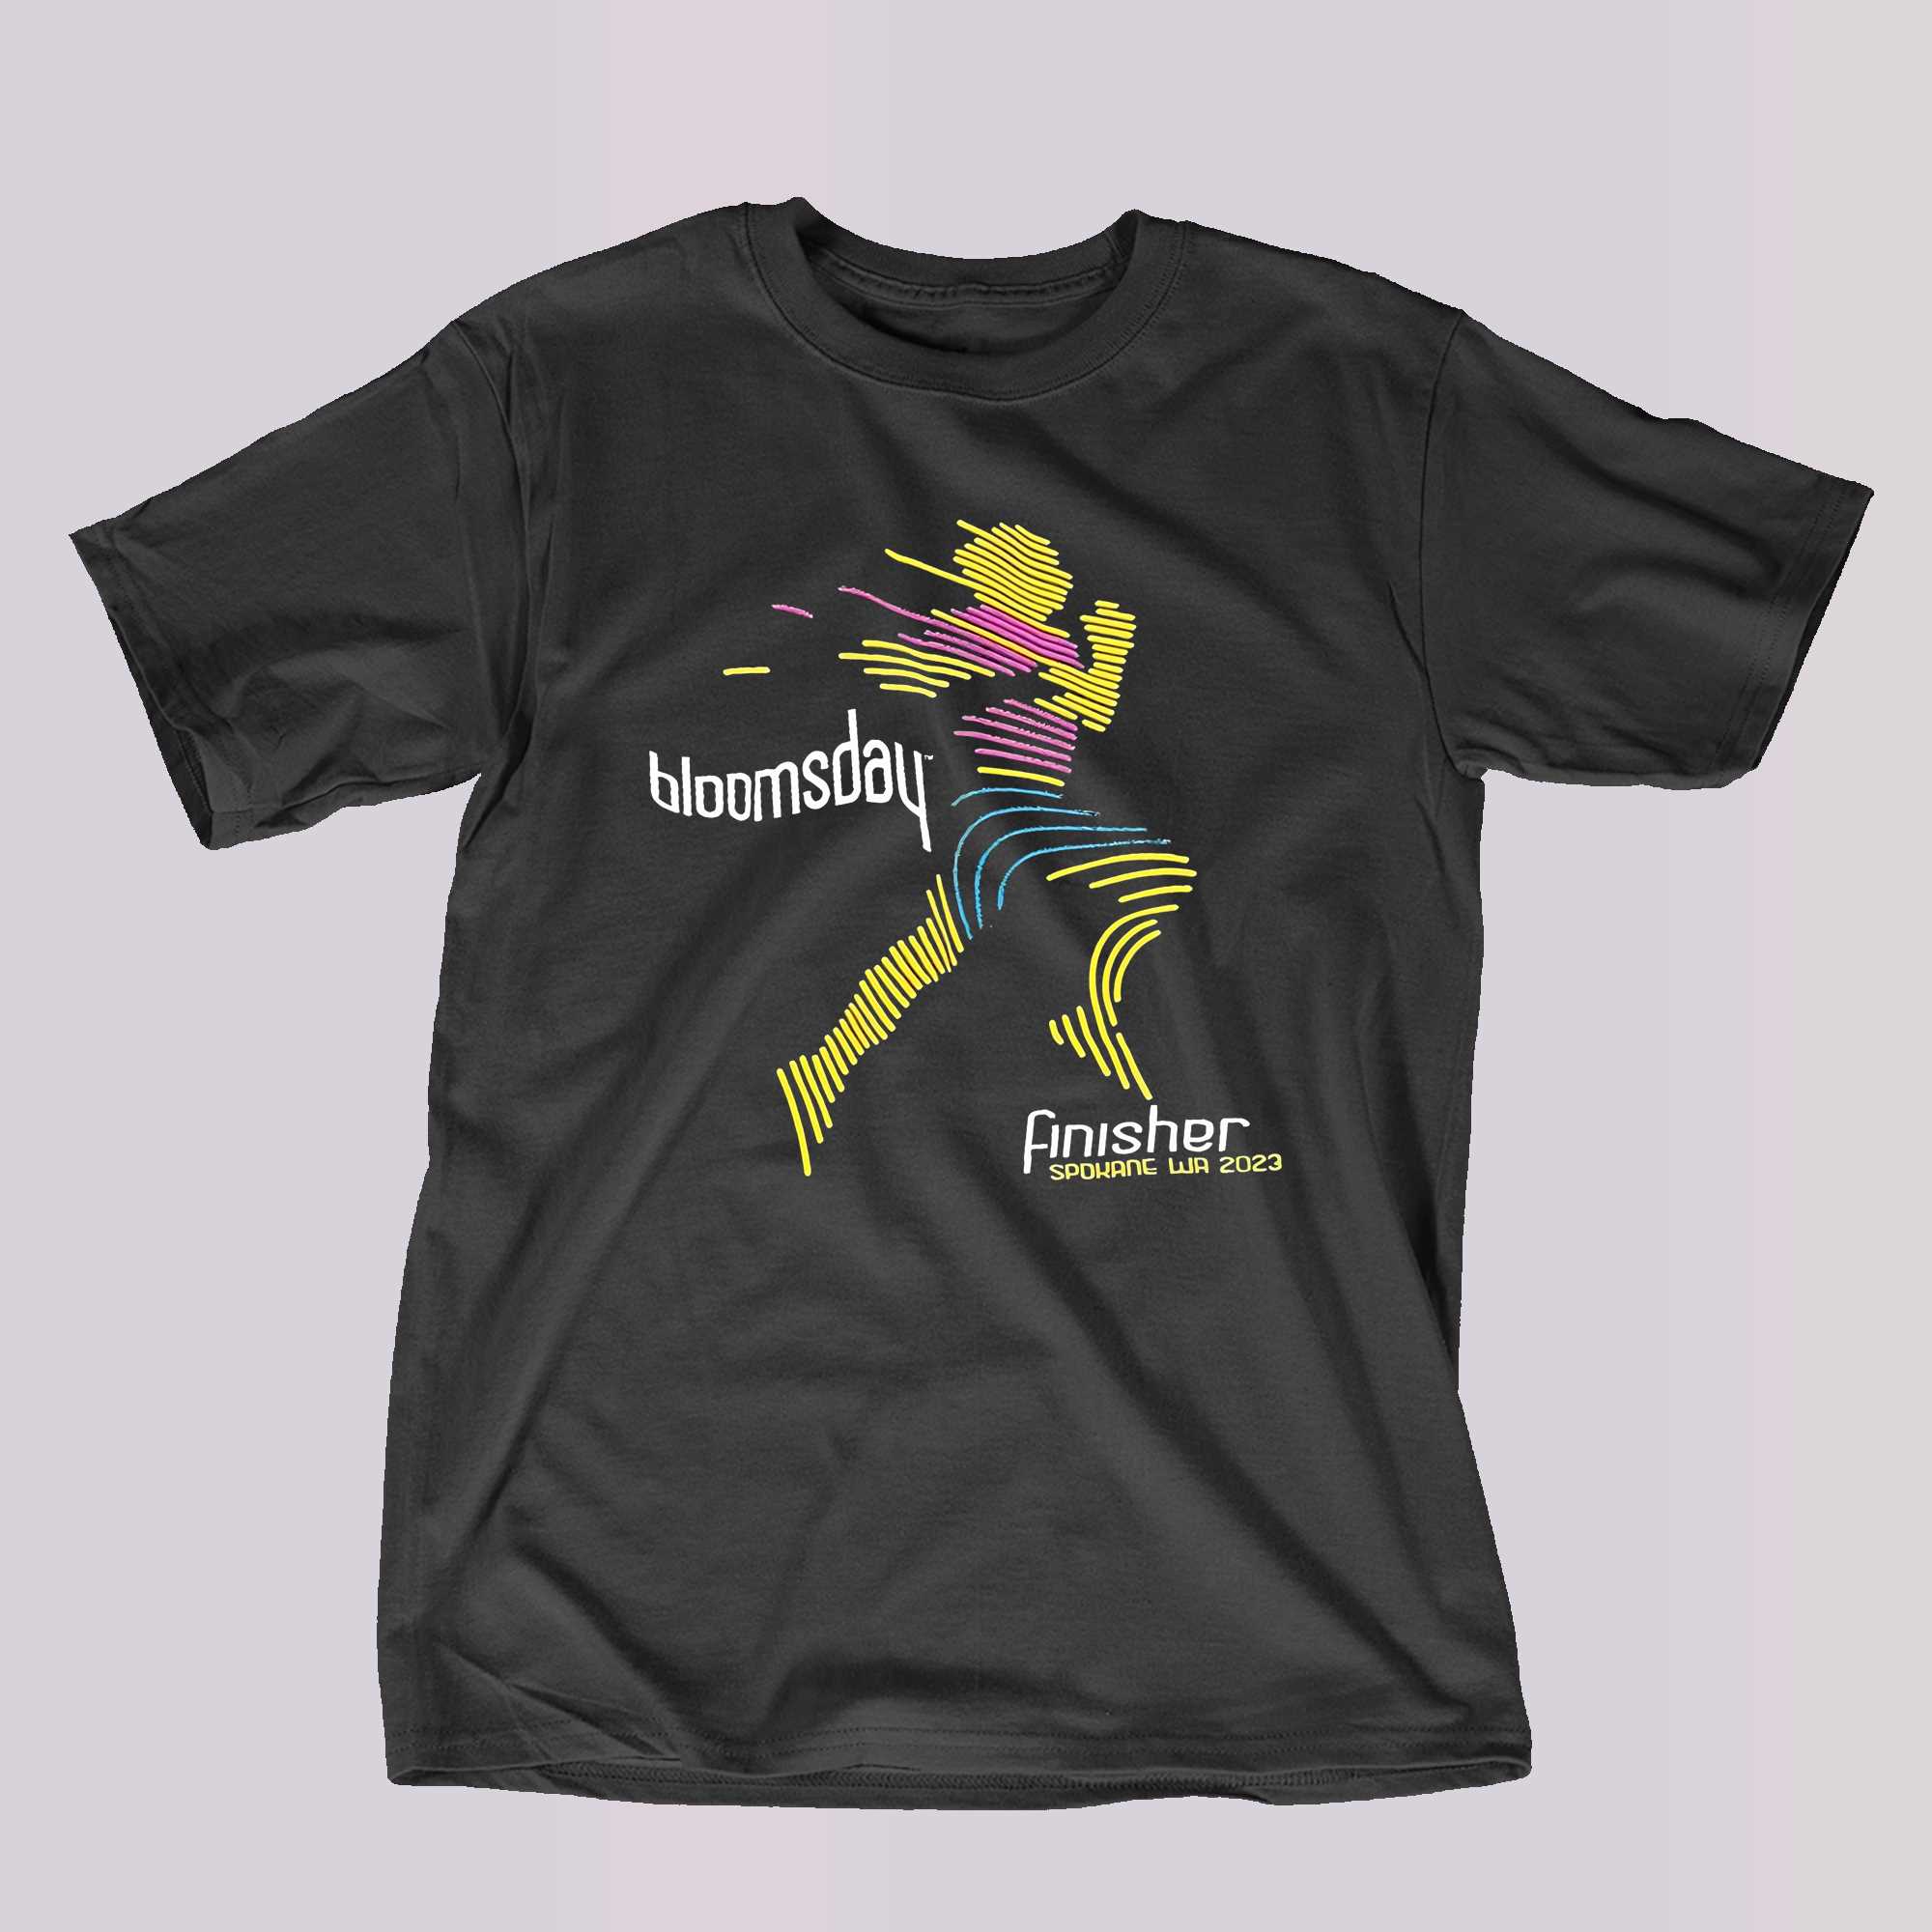 Official Bloomsday 2023 Finisher Shirt Shibtee Clothing